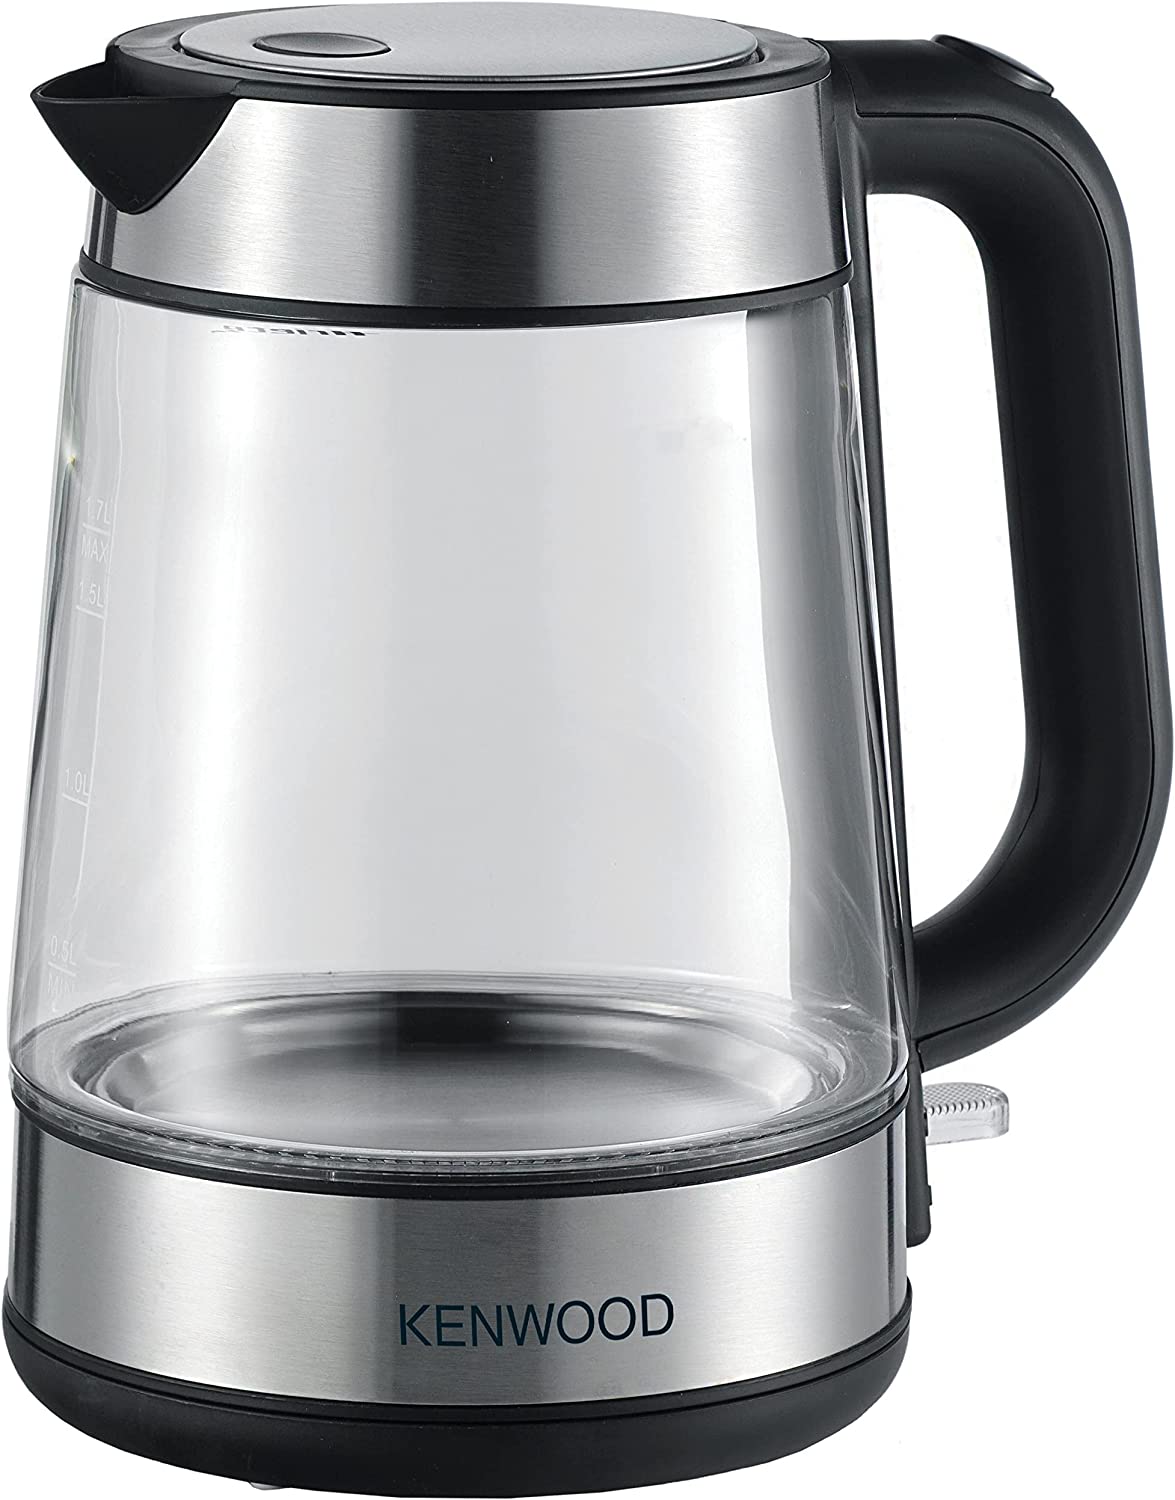 KENWOOD Glass Kettle 1.7L Cordless Electric Kettle 2200W with Auto Shut-Off & Removable Mesh Filter ZJG08.000CL